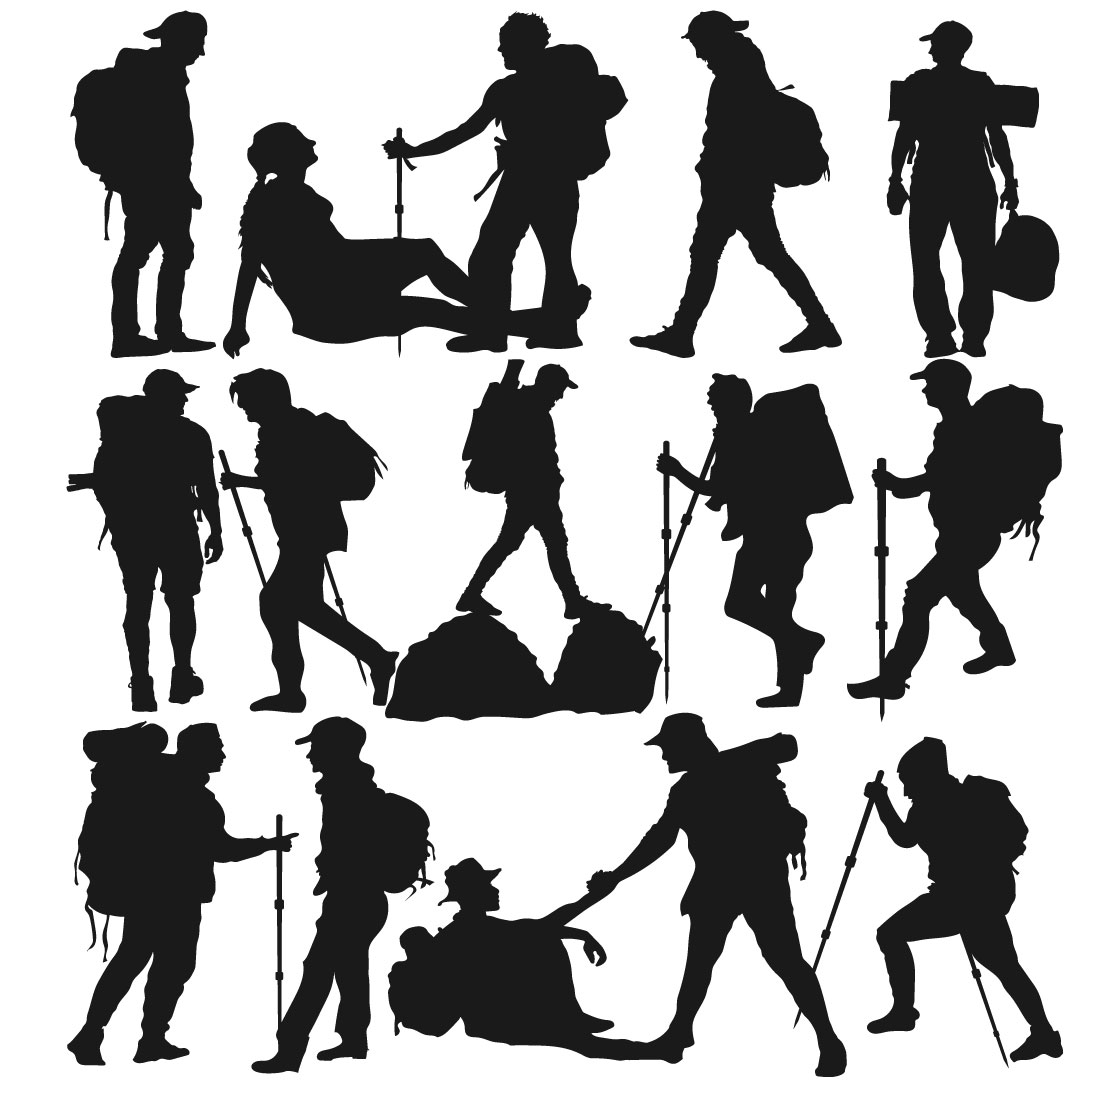 Adventure Climber hiker backpacker silhouette vector of a mountaineer preview image.